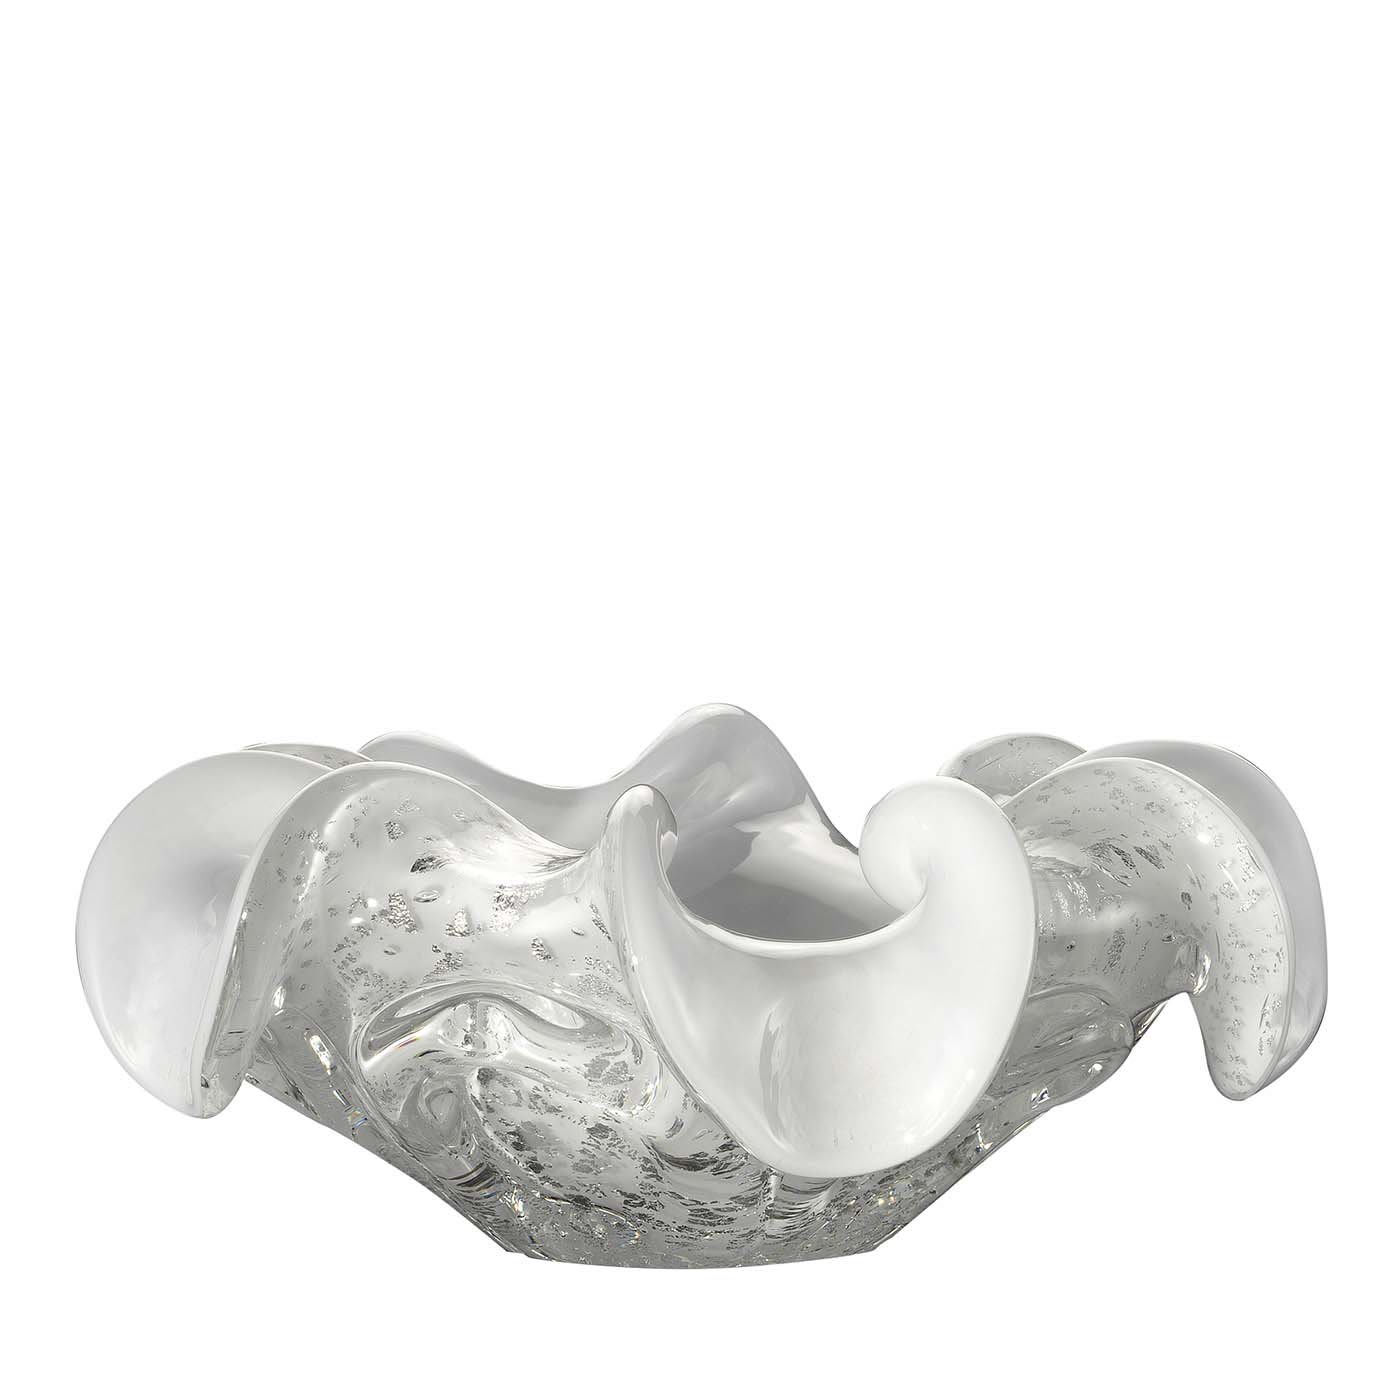 Aura White and Silver Ashtray - Fornace Mian